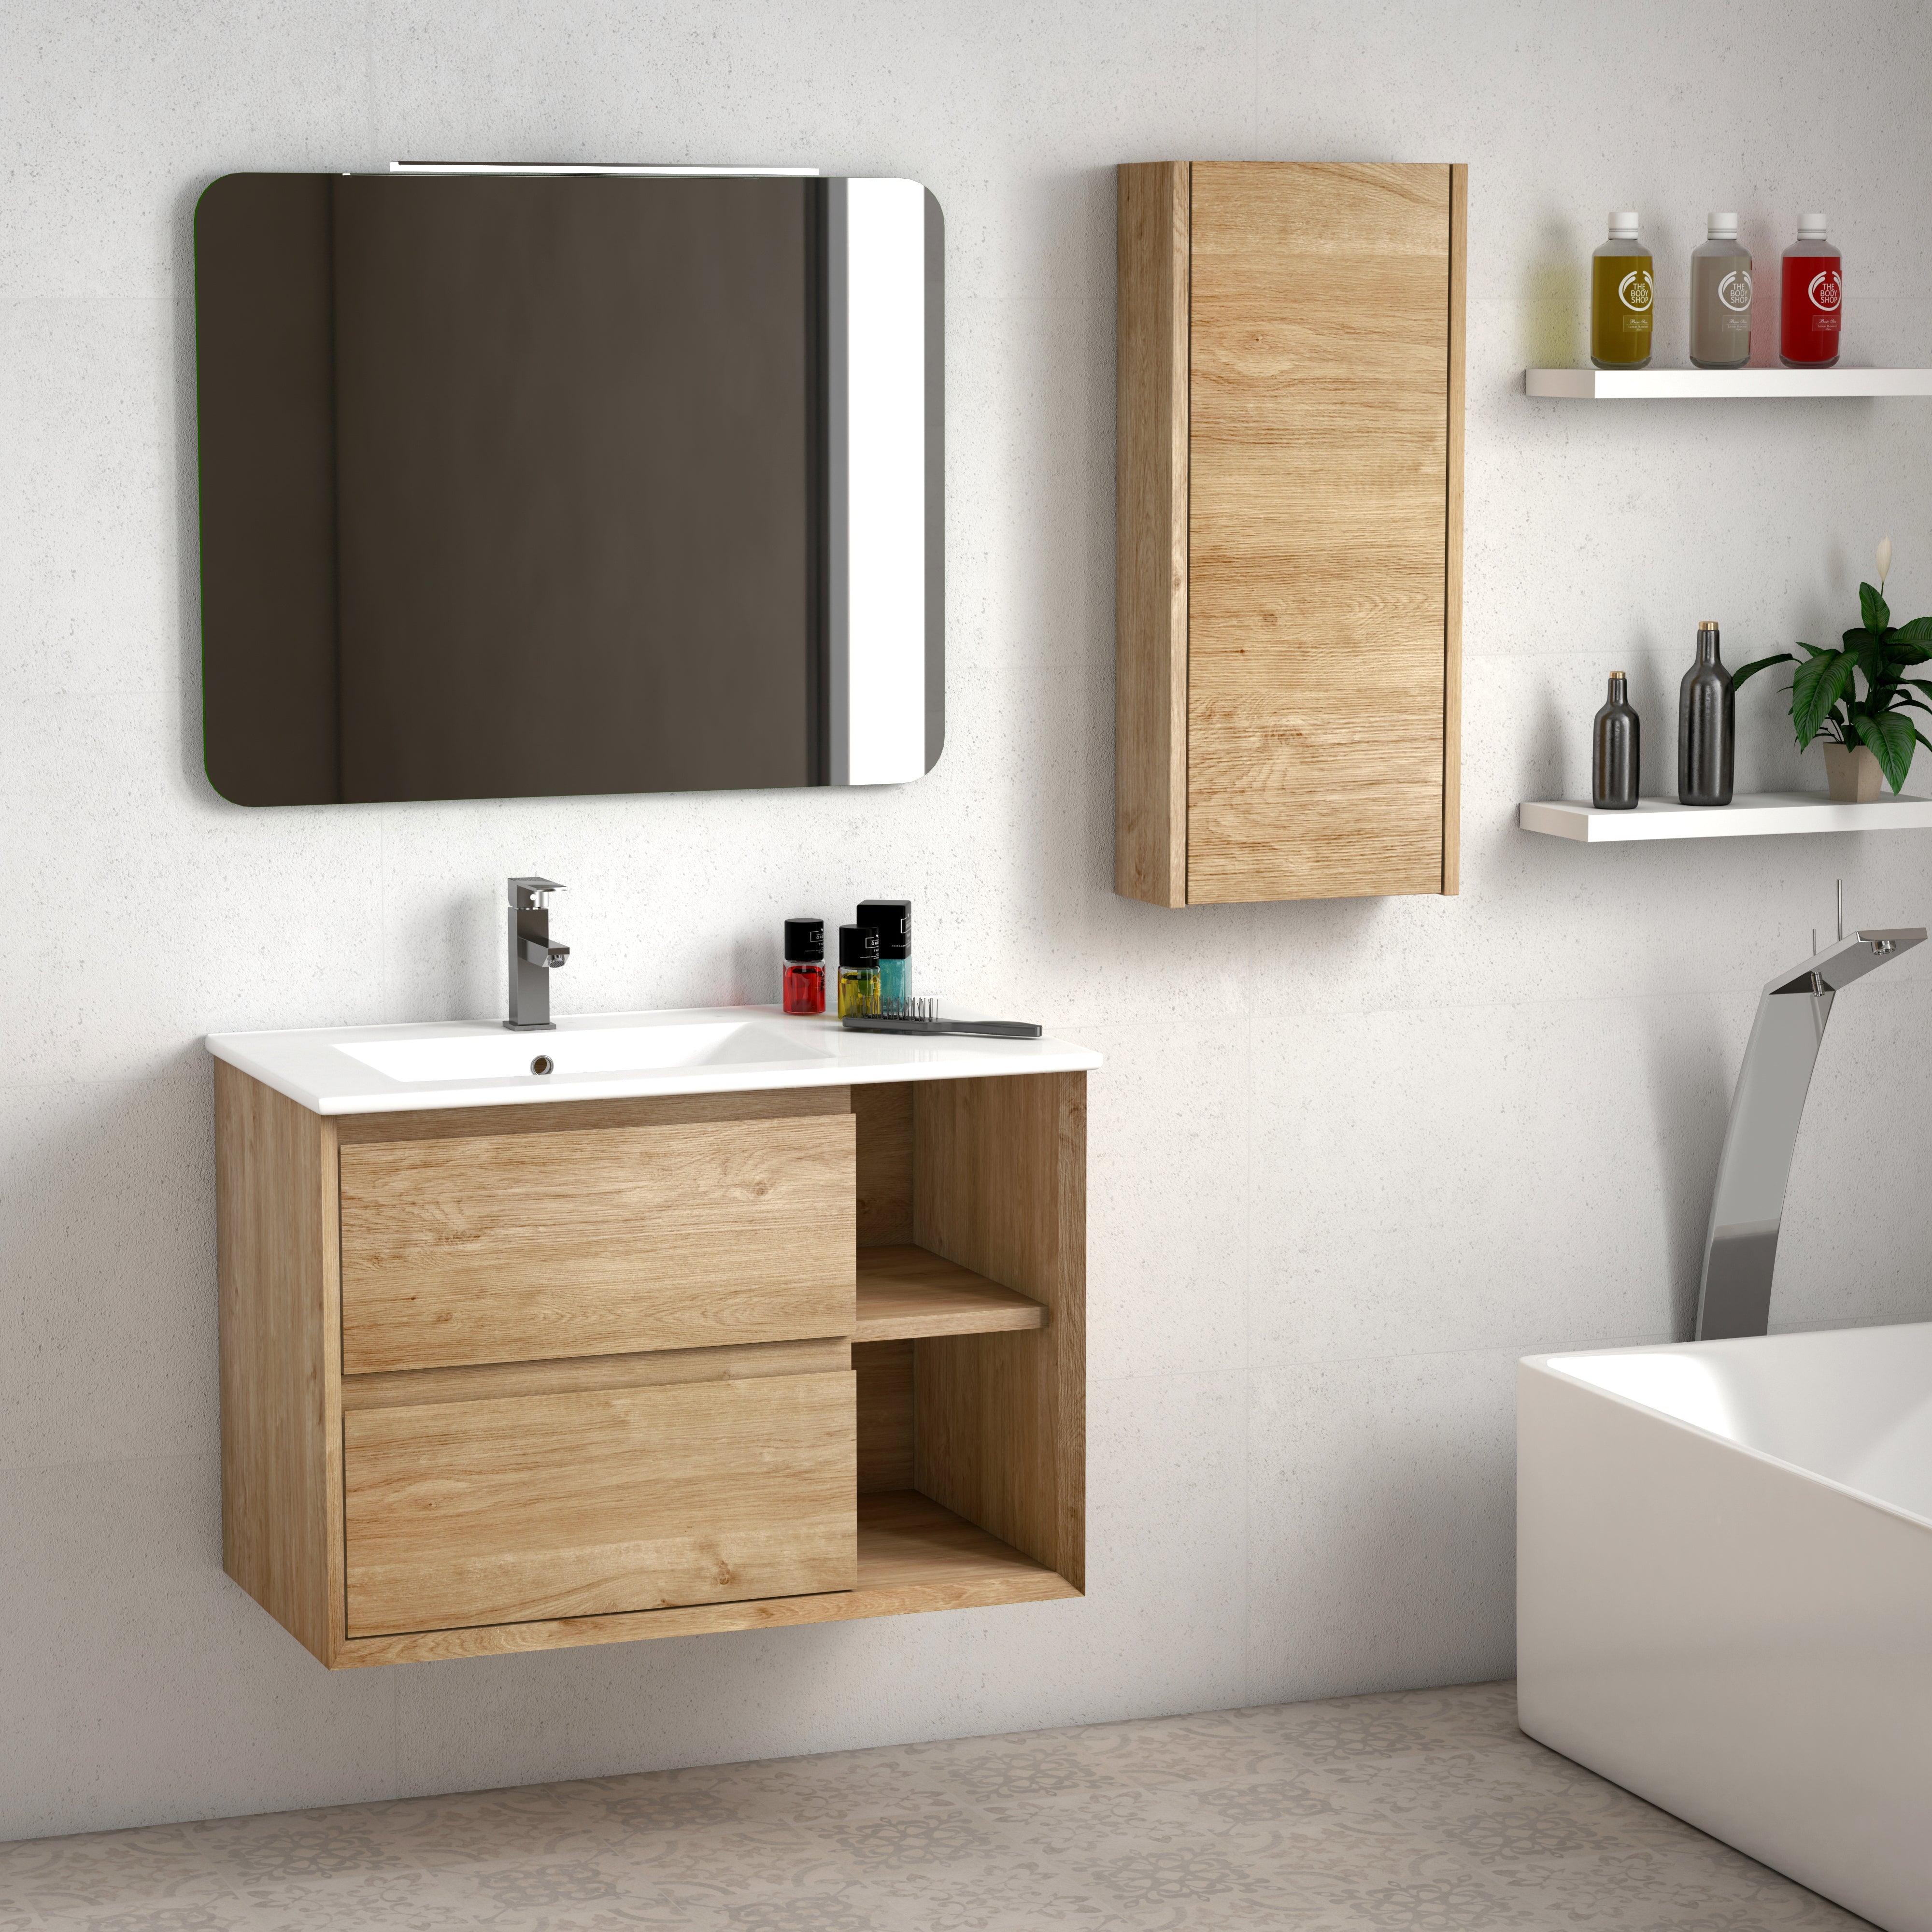 DAX Oceanside Vanity Cabinet with Onix Basin